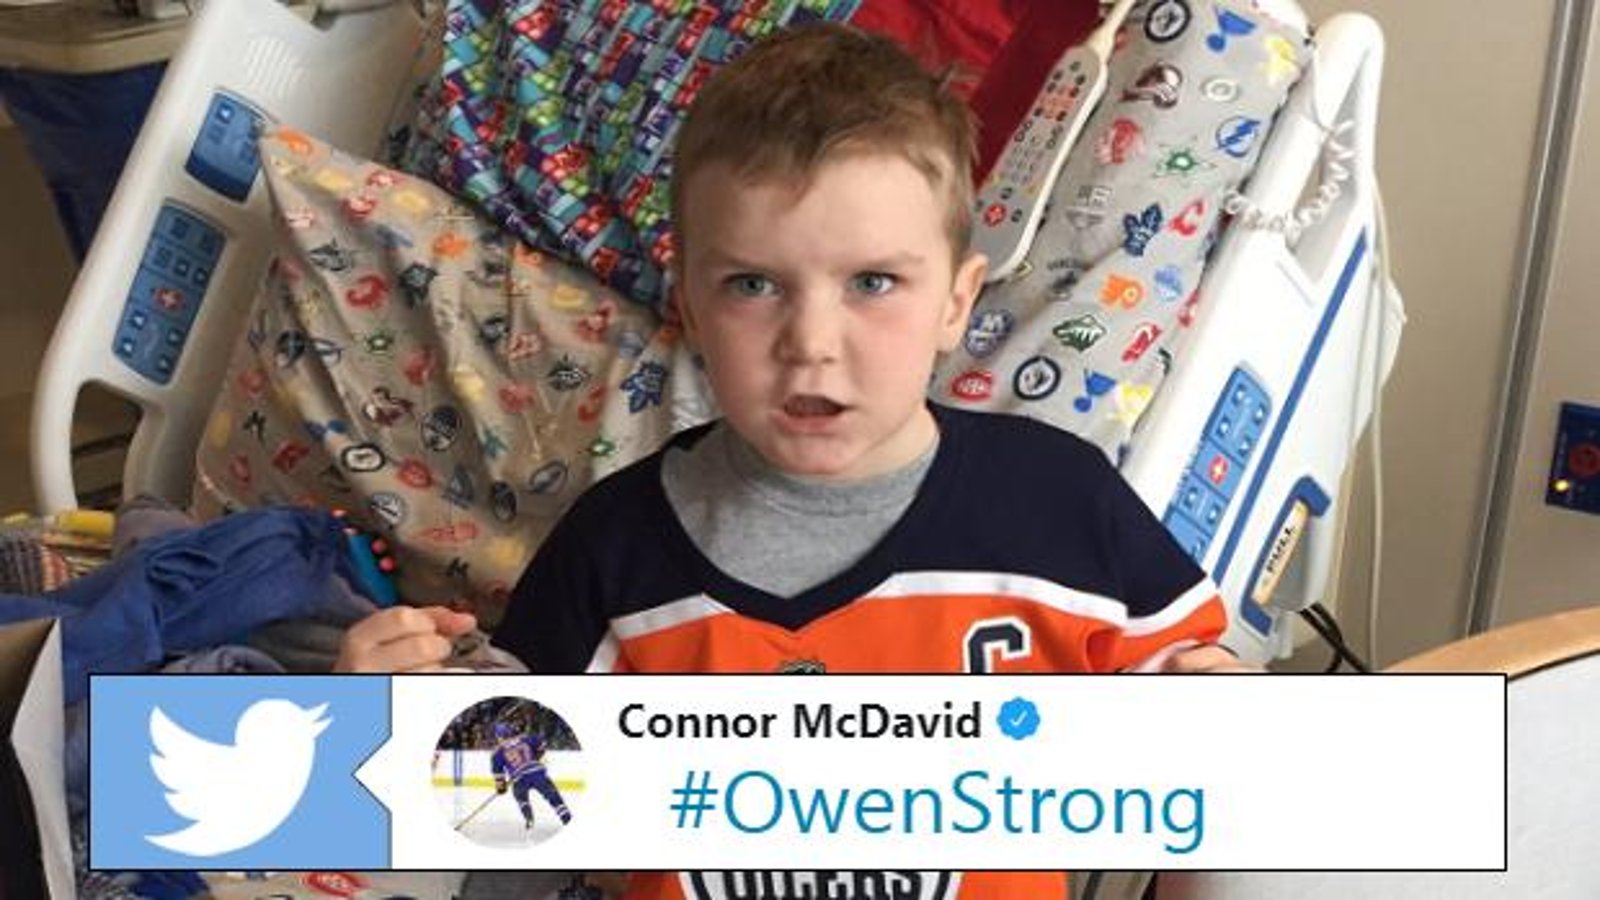 McDavid shares emotional tweet after young Leukemia patient received his jersey for Christmas